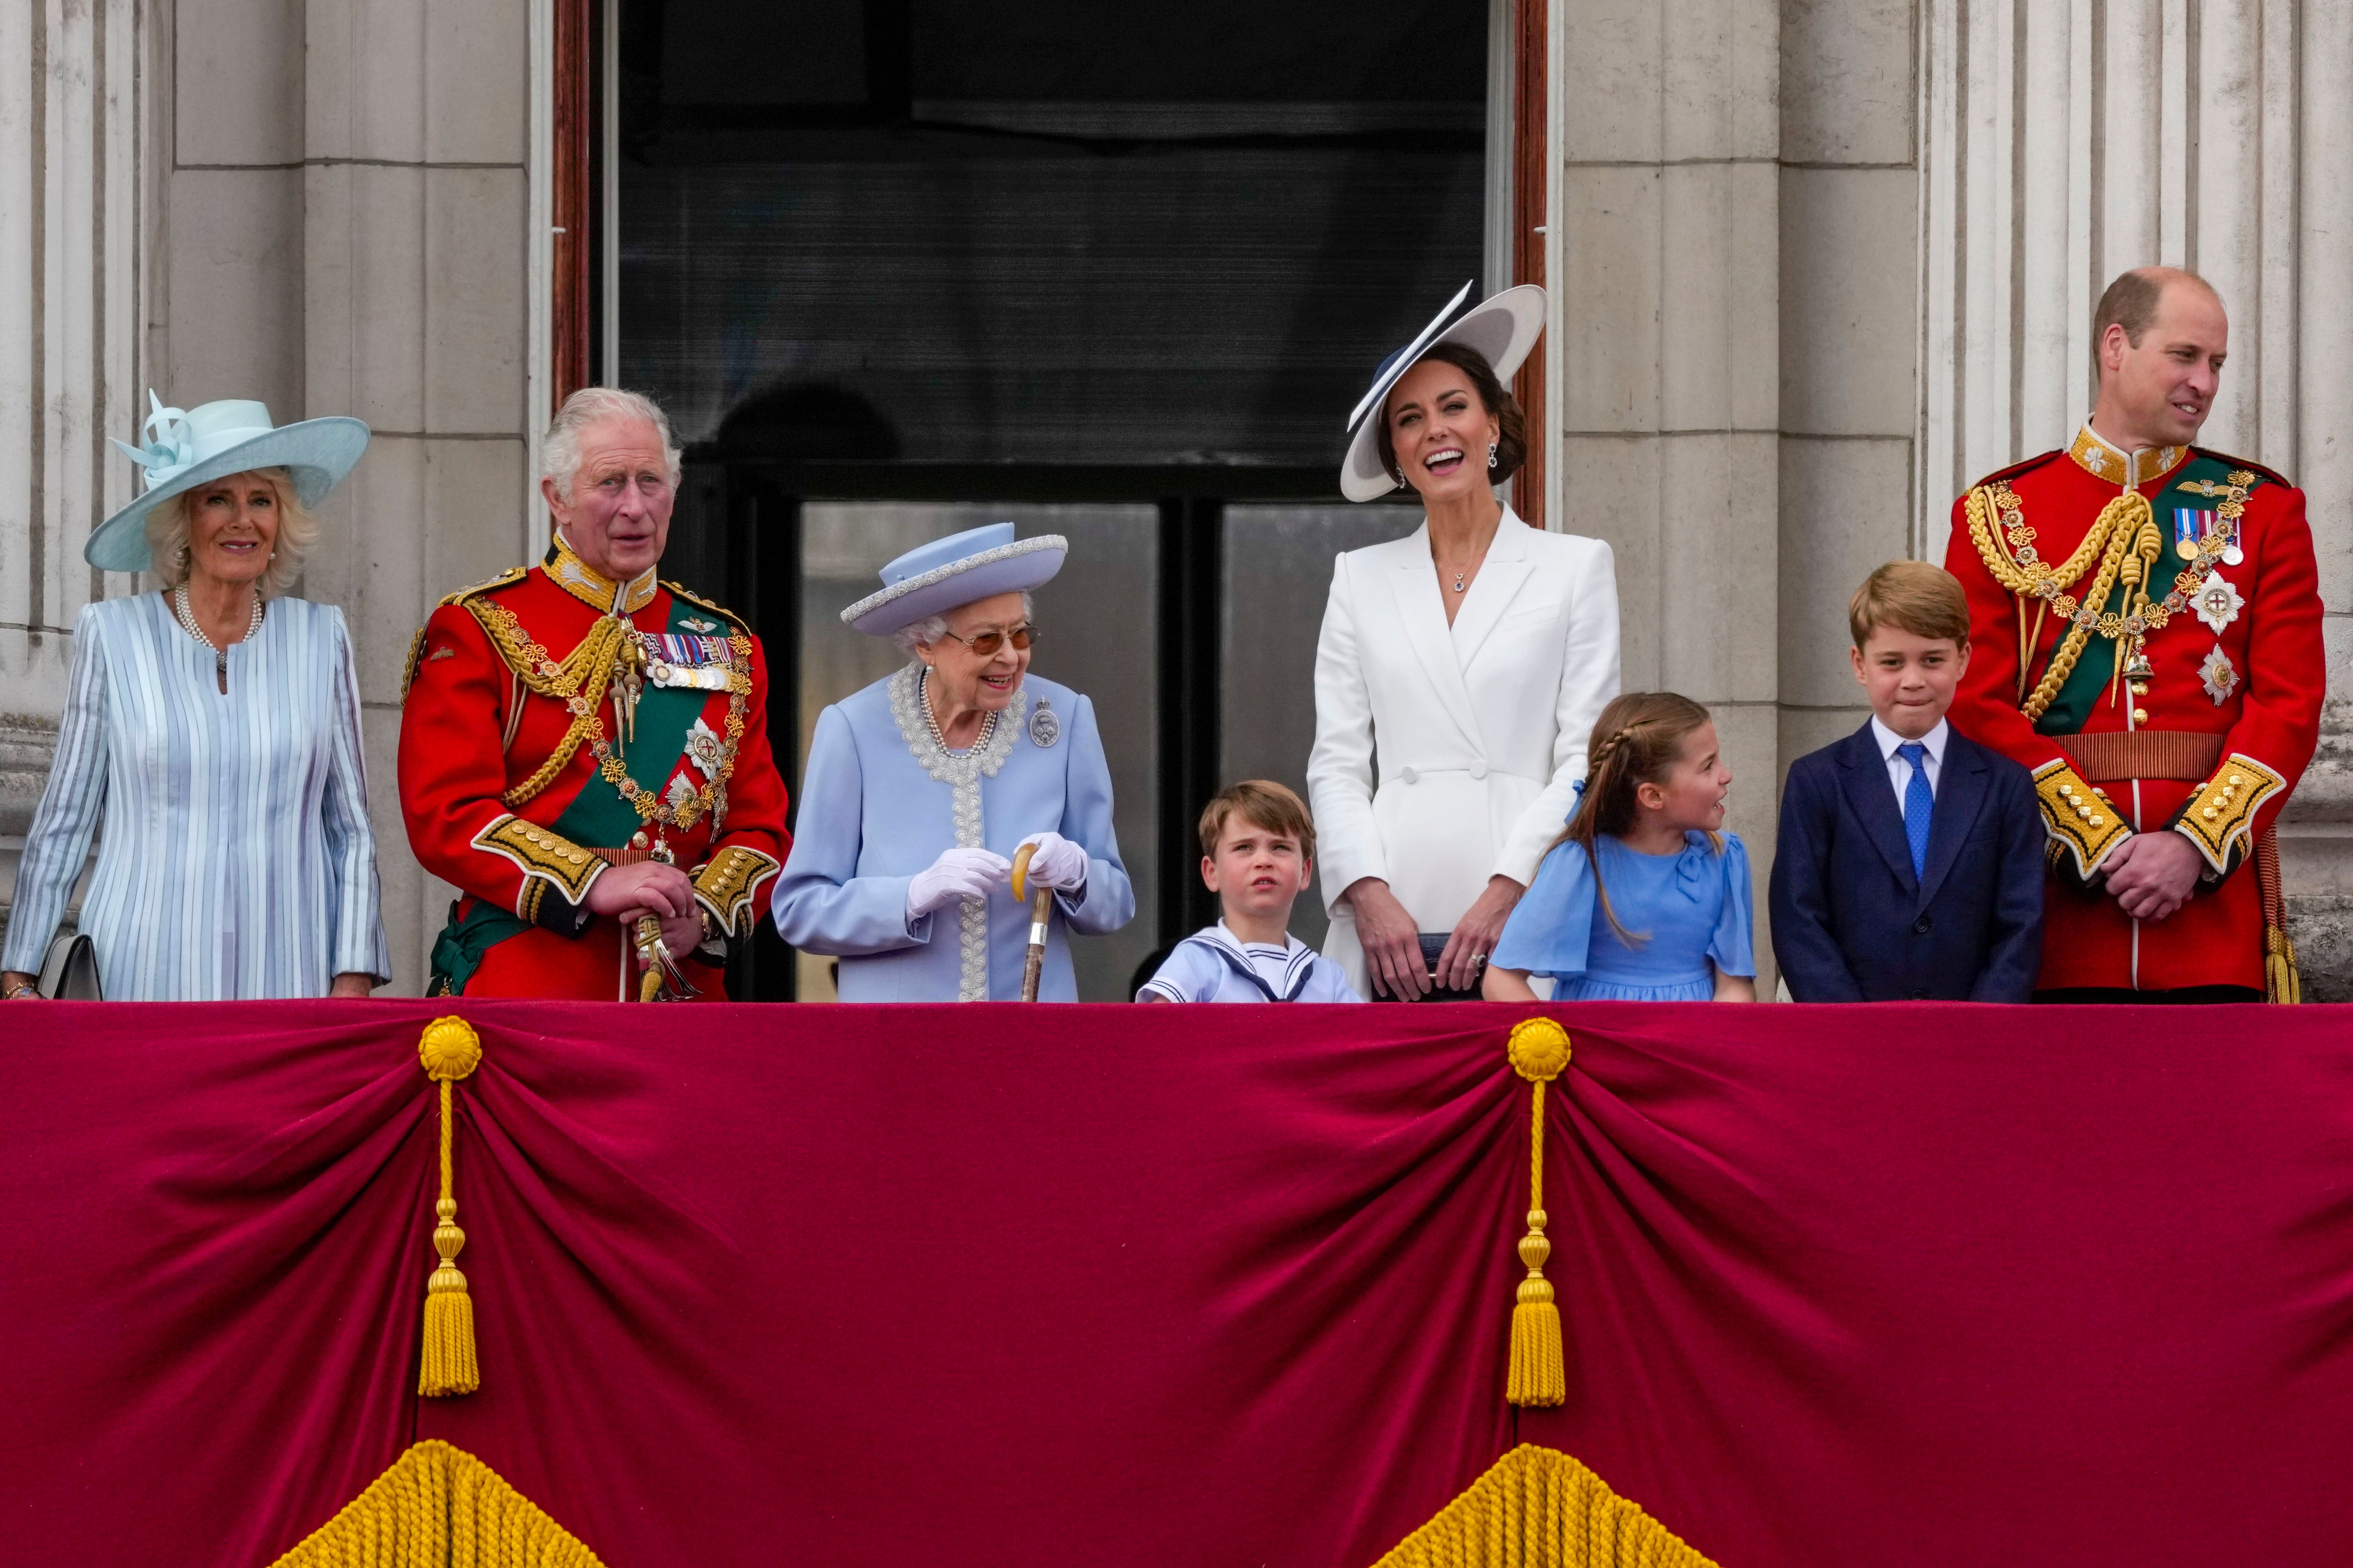 ‘I think the challenge is they’ve turned [the royal family] into a soap opera,’ says Brandreth